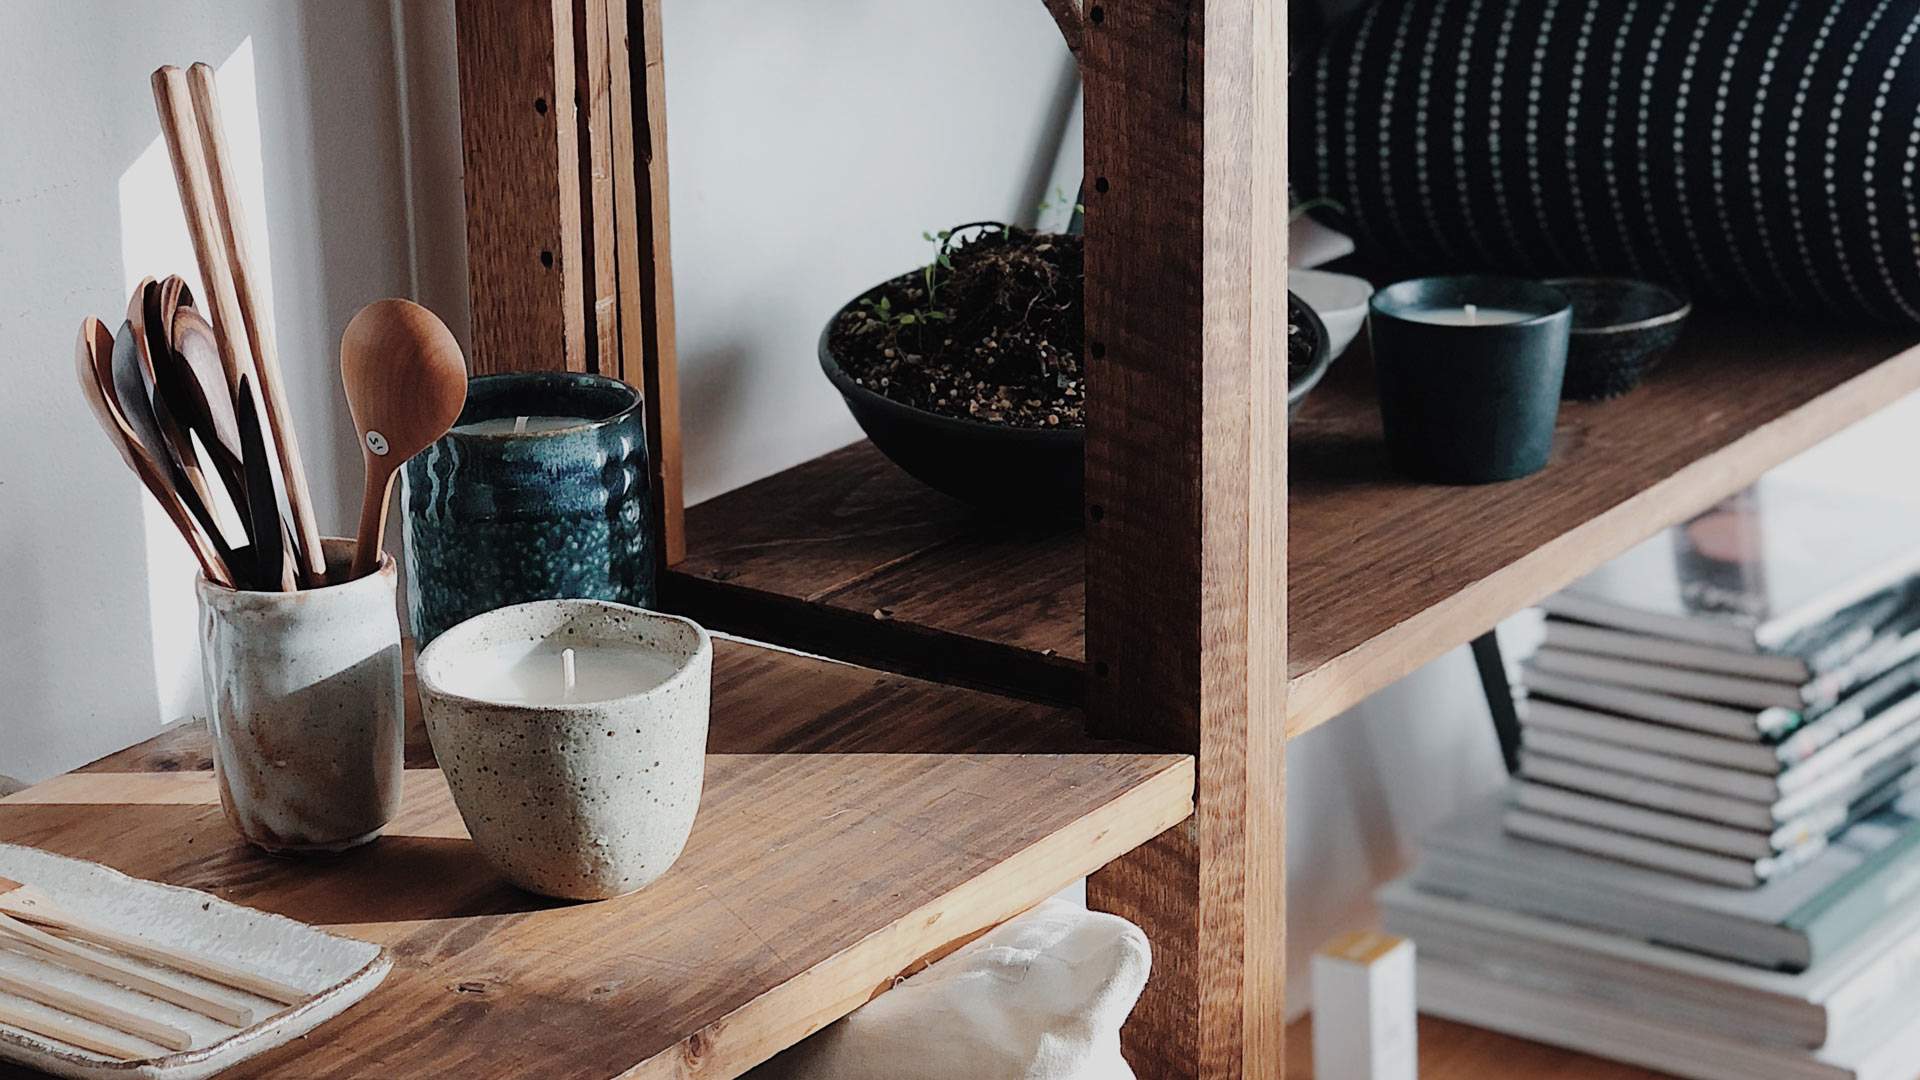 Surry Hills Has a Stunning New Ethical Homewares Store